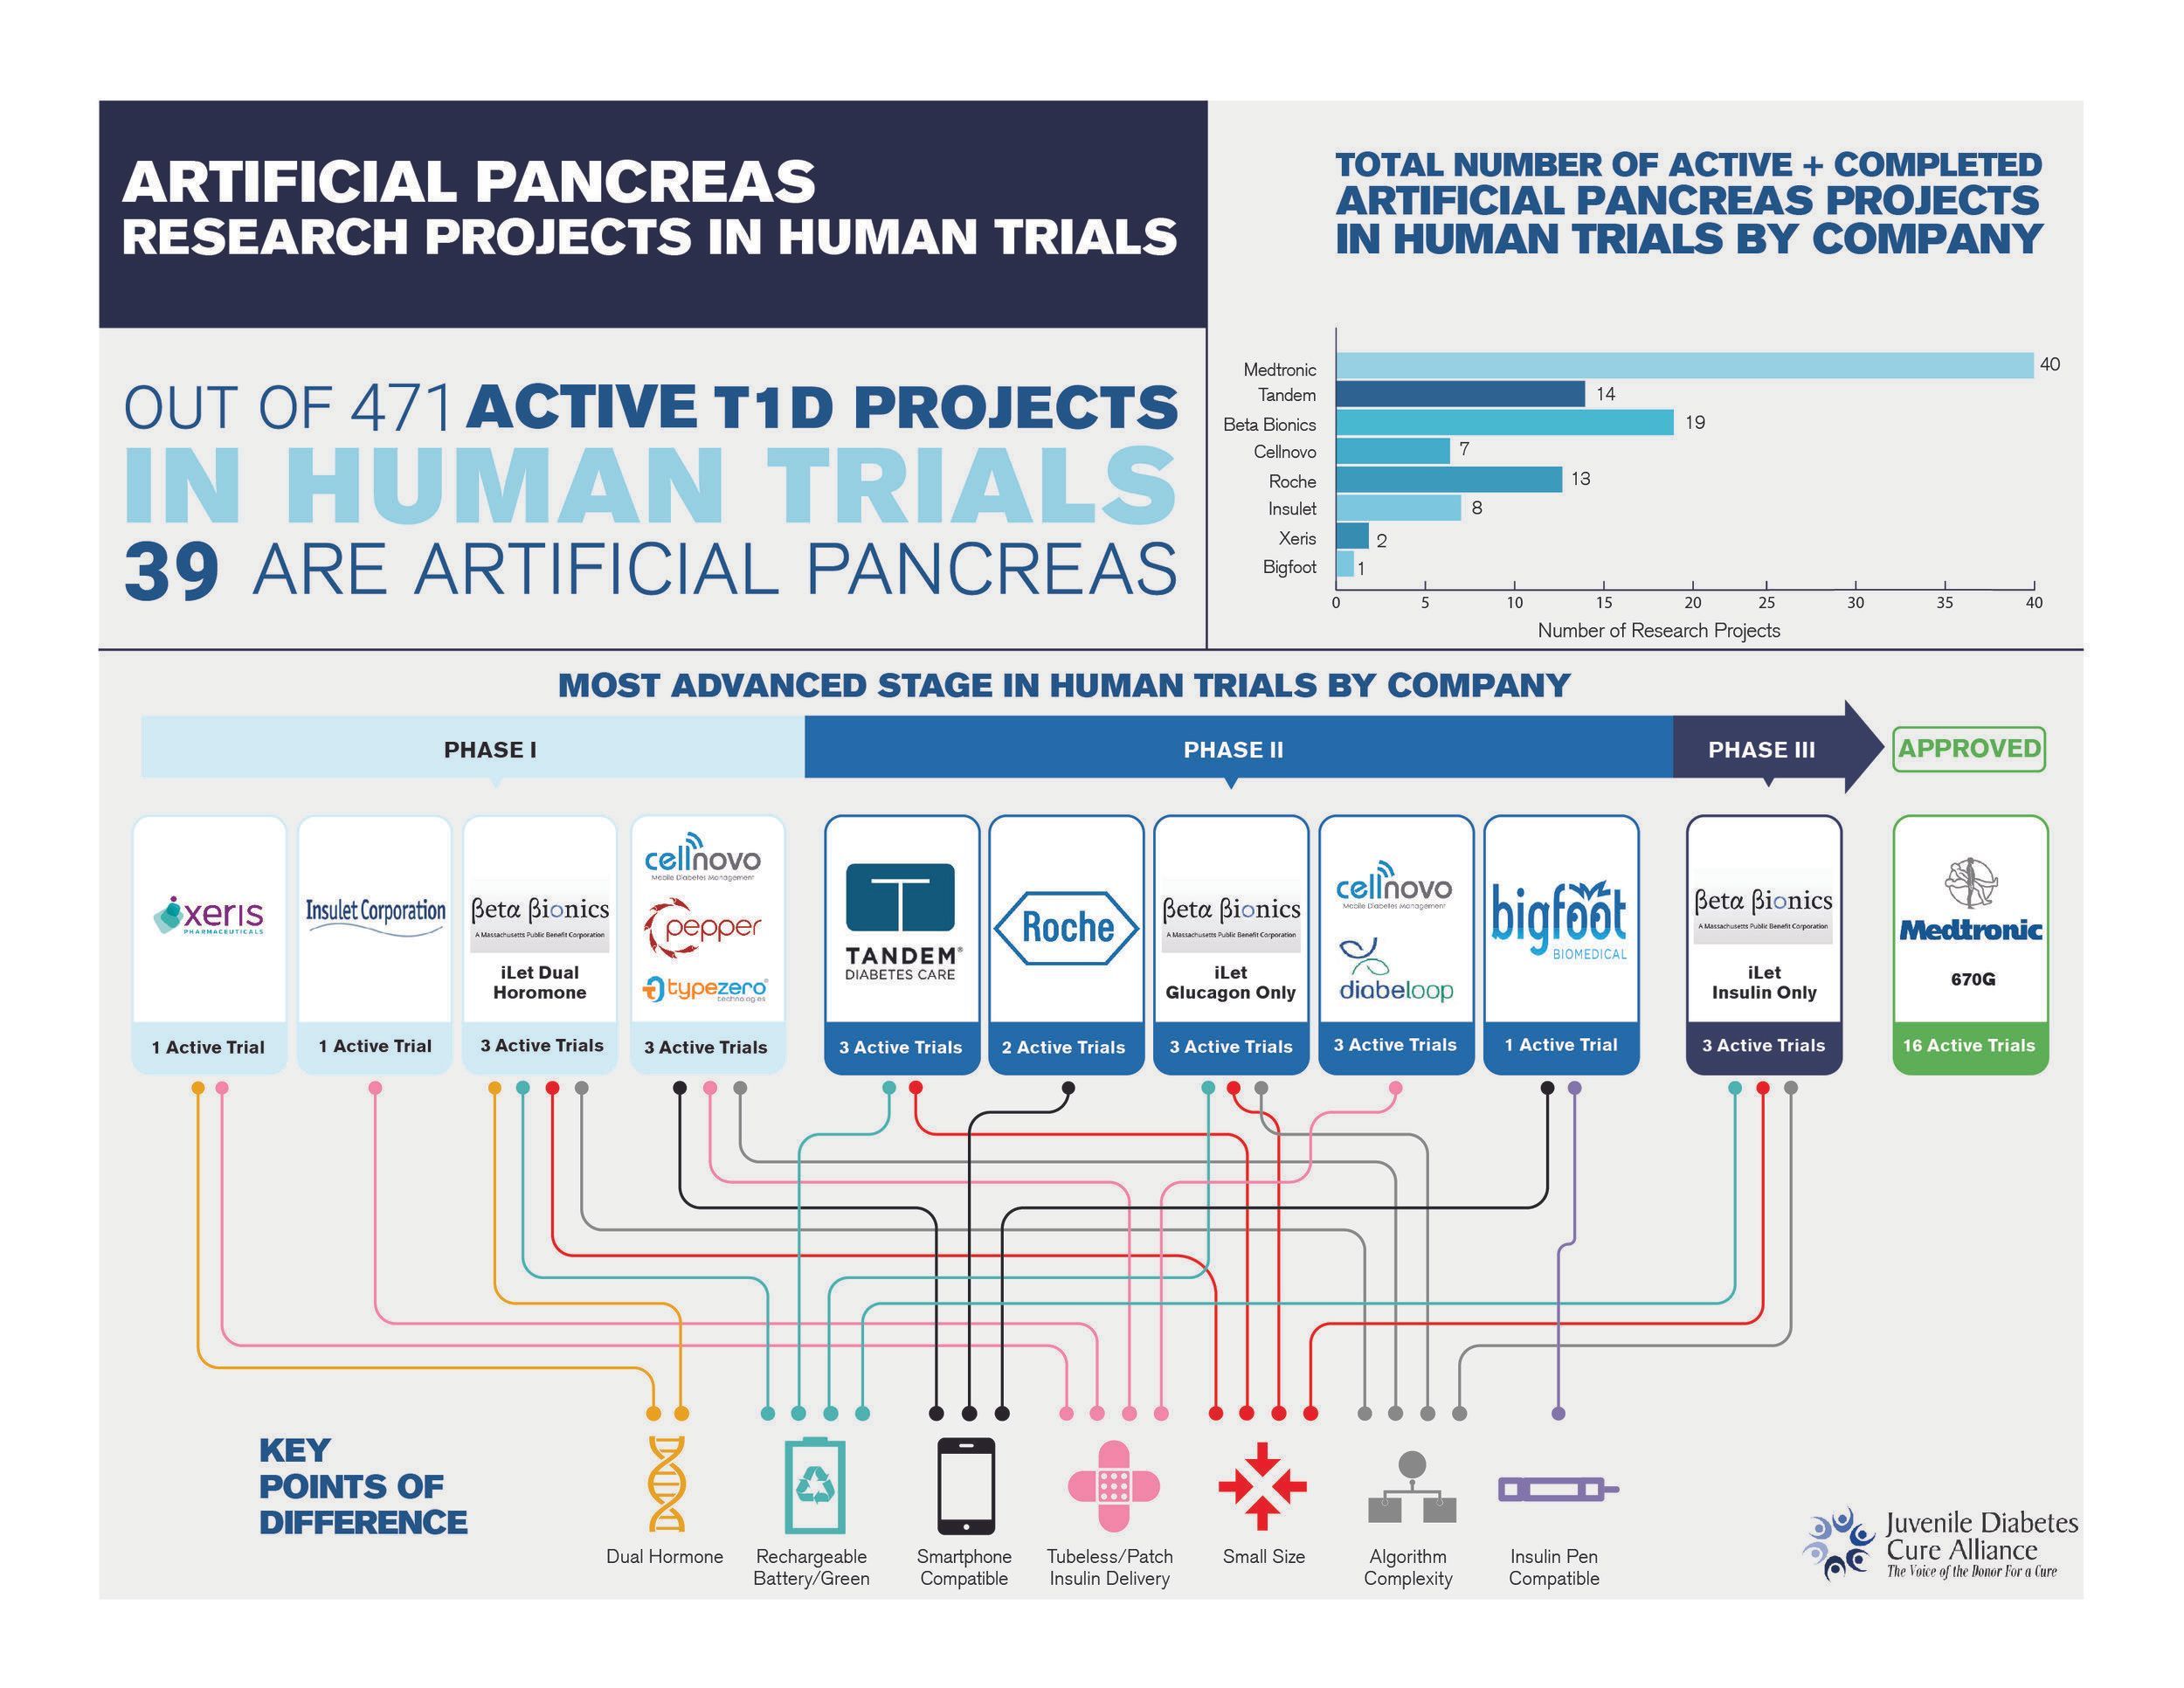 Artificial Pancreas Projects in Human Trials by Competitor